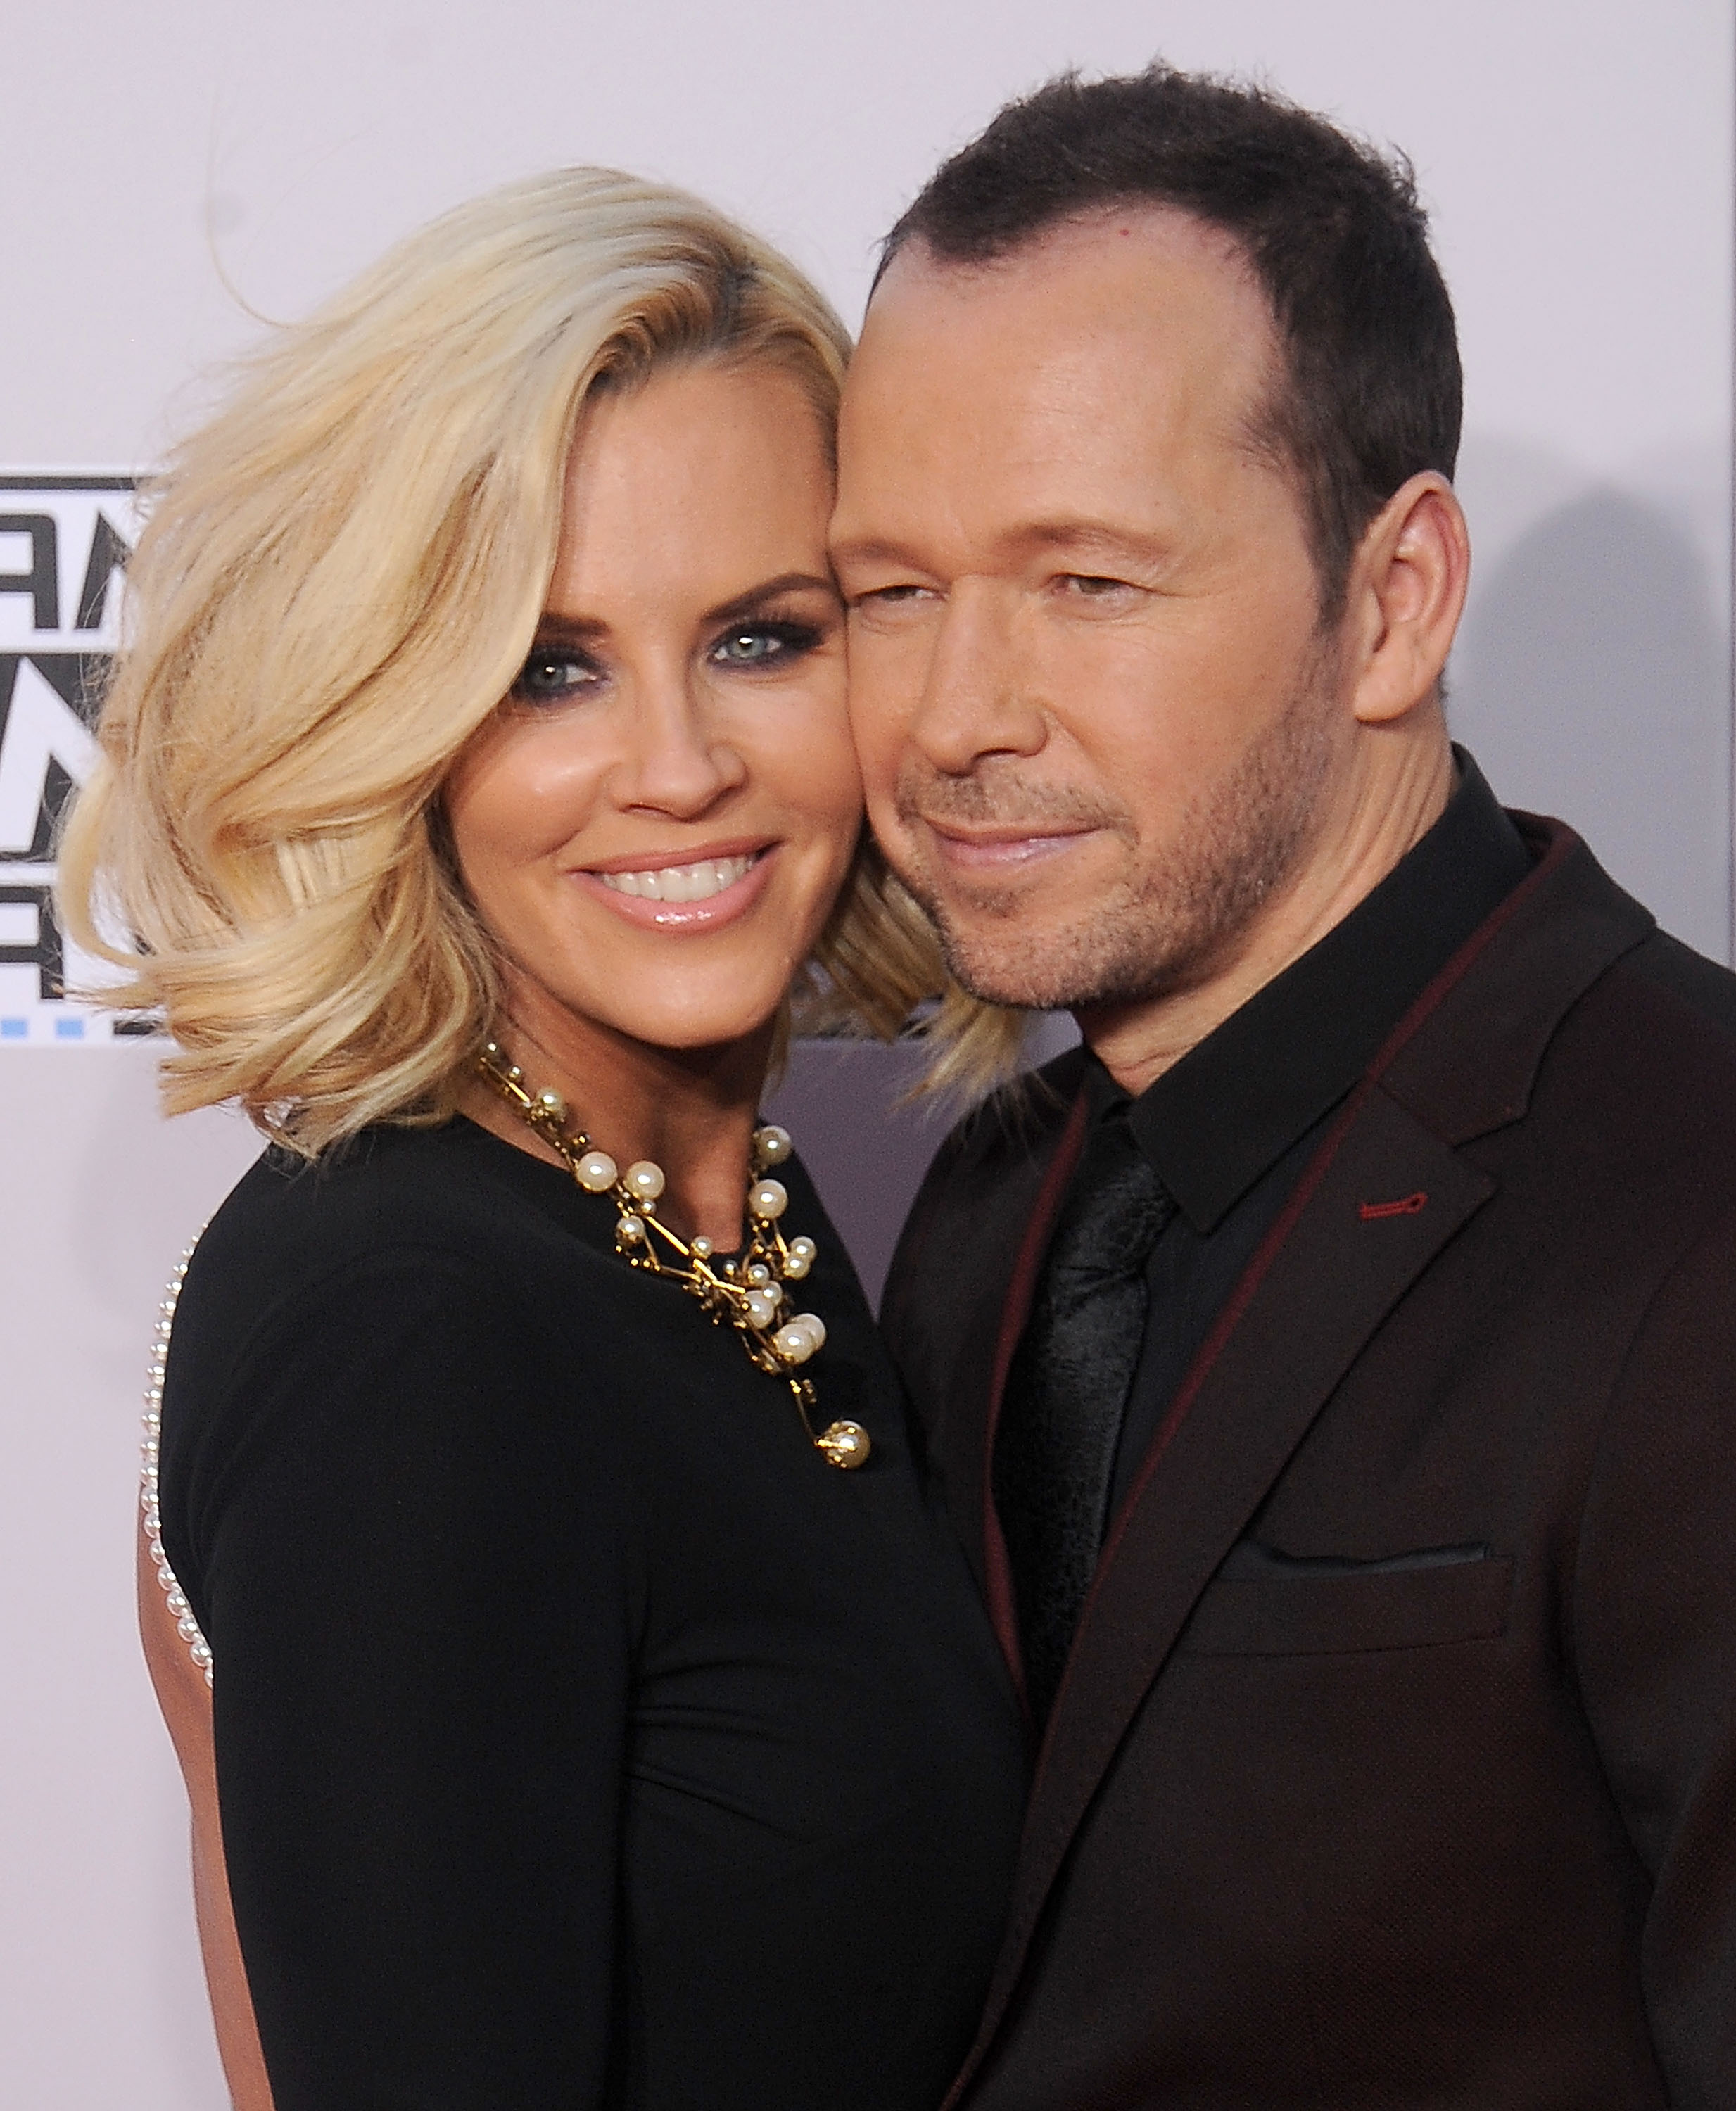 Jenny McCarthy and her husband Donnie Wahlberg in Los Angeles in 2014 | Source: Getty Images